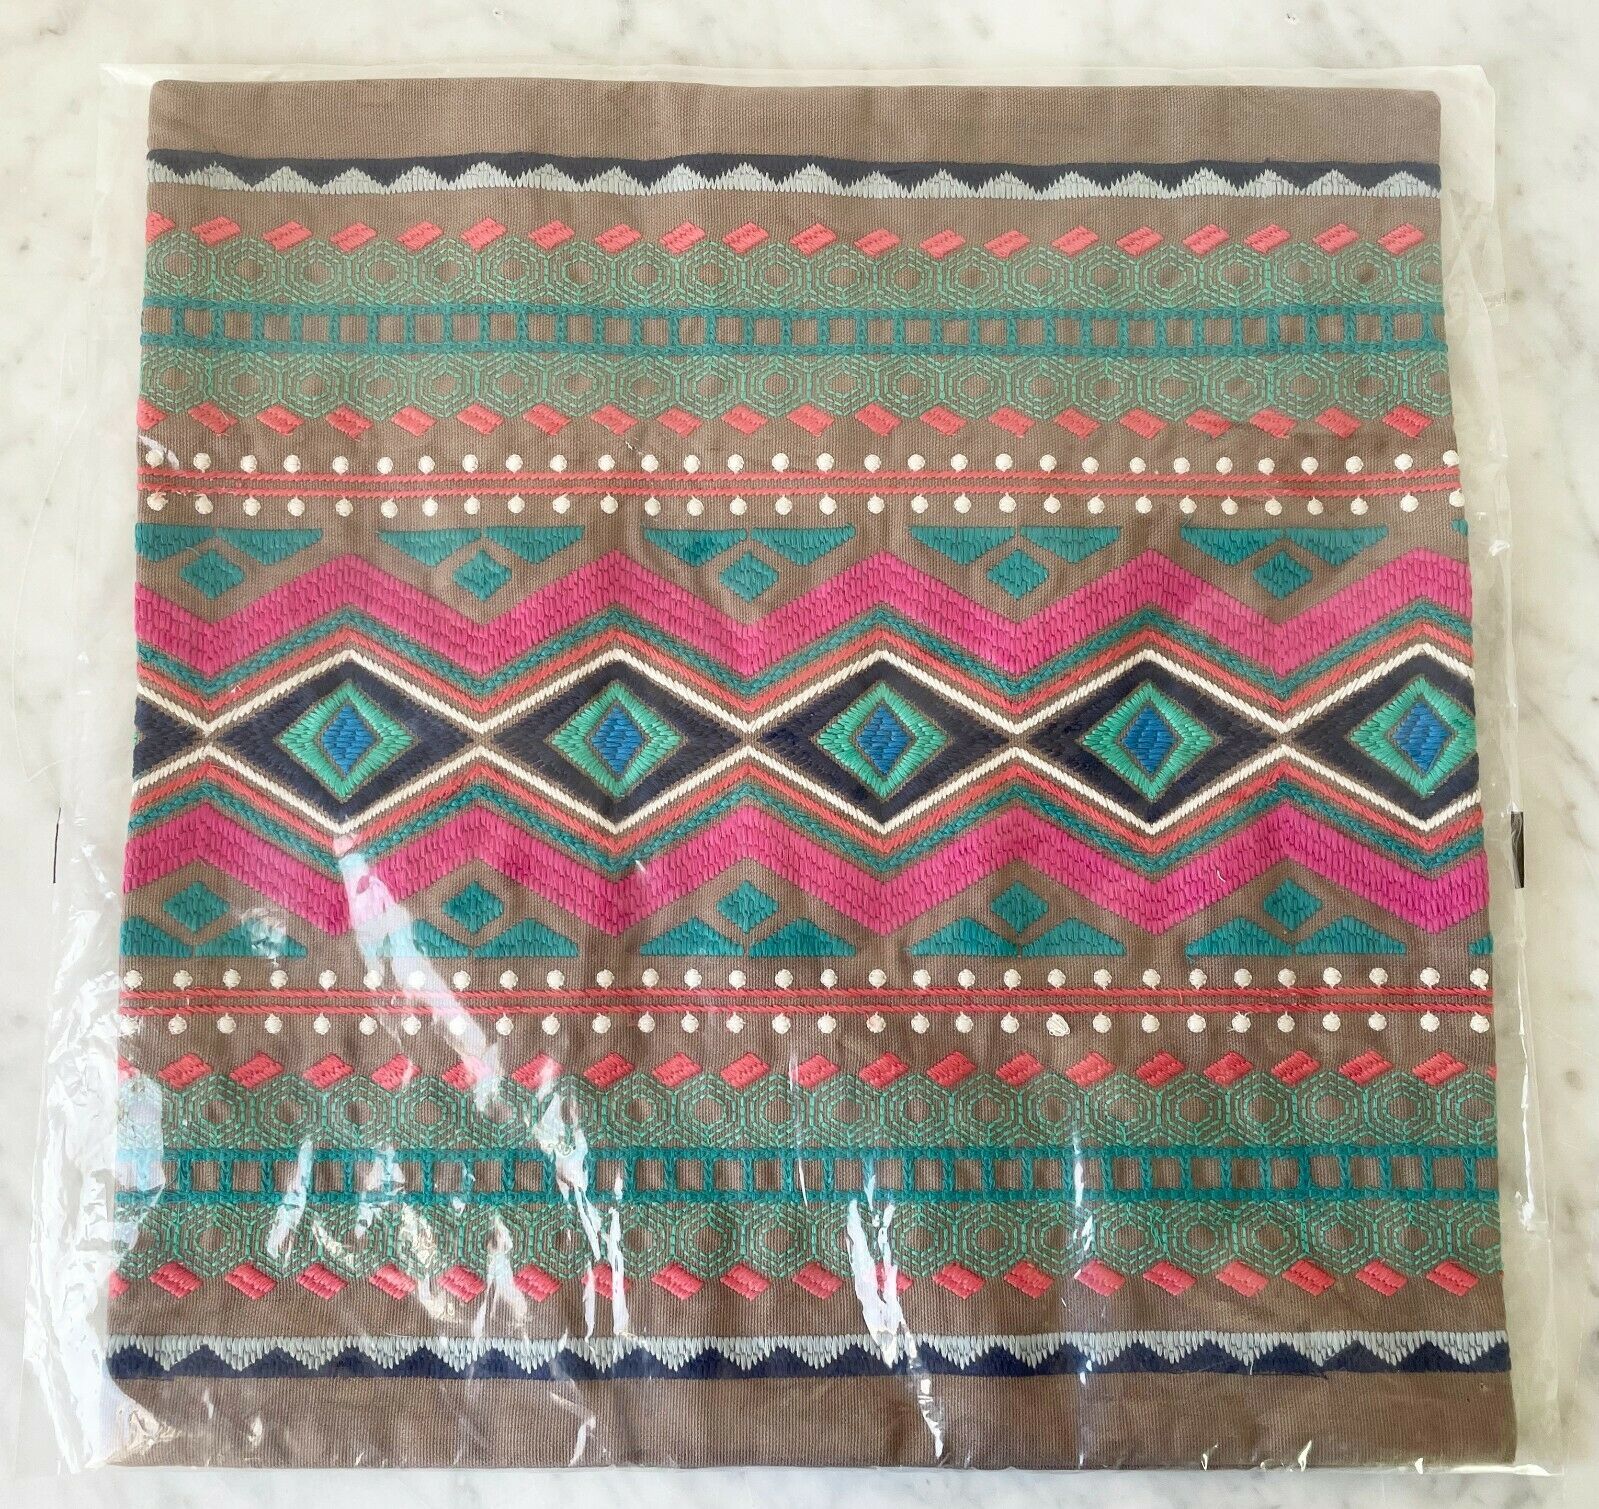 West Elm Pueblo Taupe Pink Turquoise Embroidered Throw Pillow Cover 15 x 16 NEW - $33.20